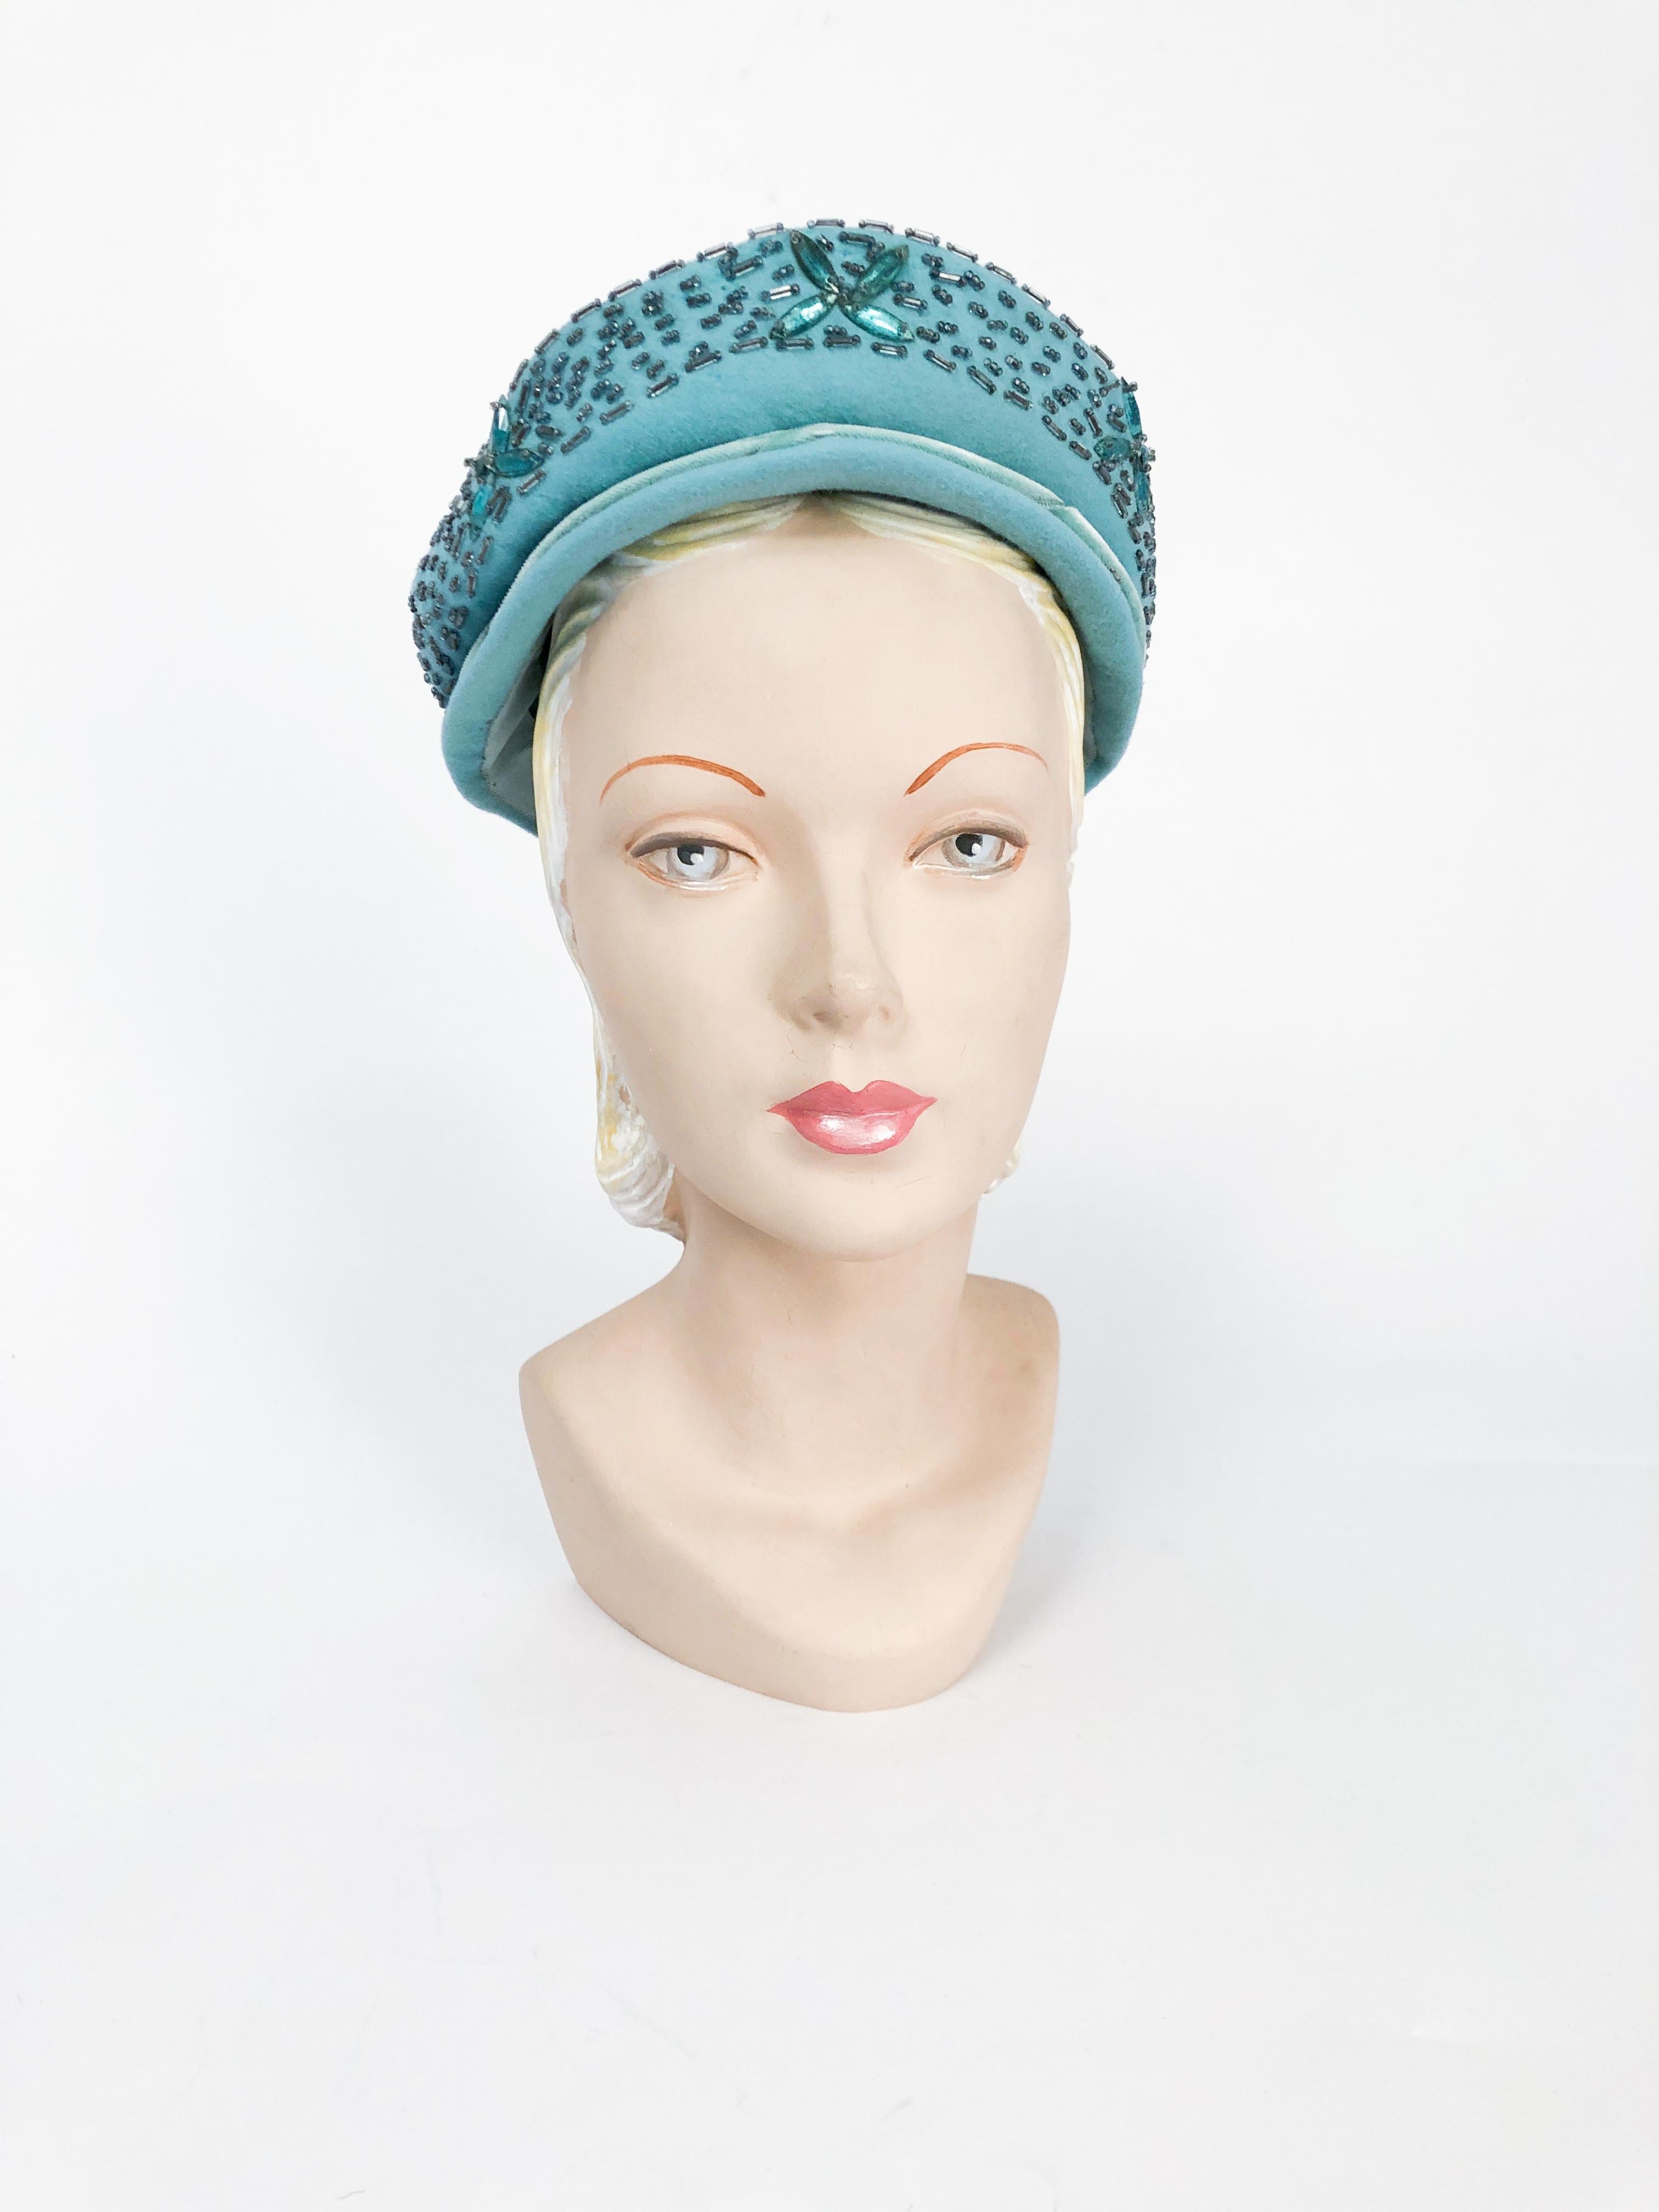 1940s Robin Egg Blue Felt Hat with Beadwork, silk velvet cording, applied felt accents and a matching hat pin.